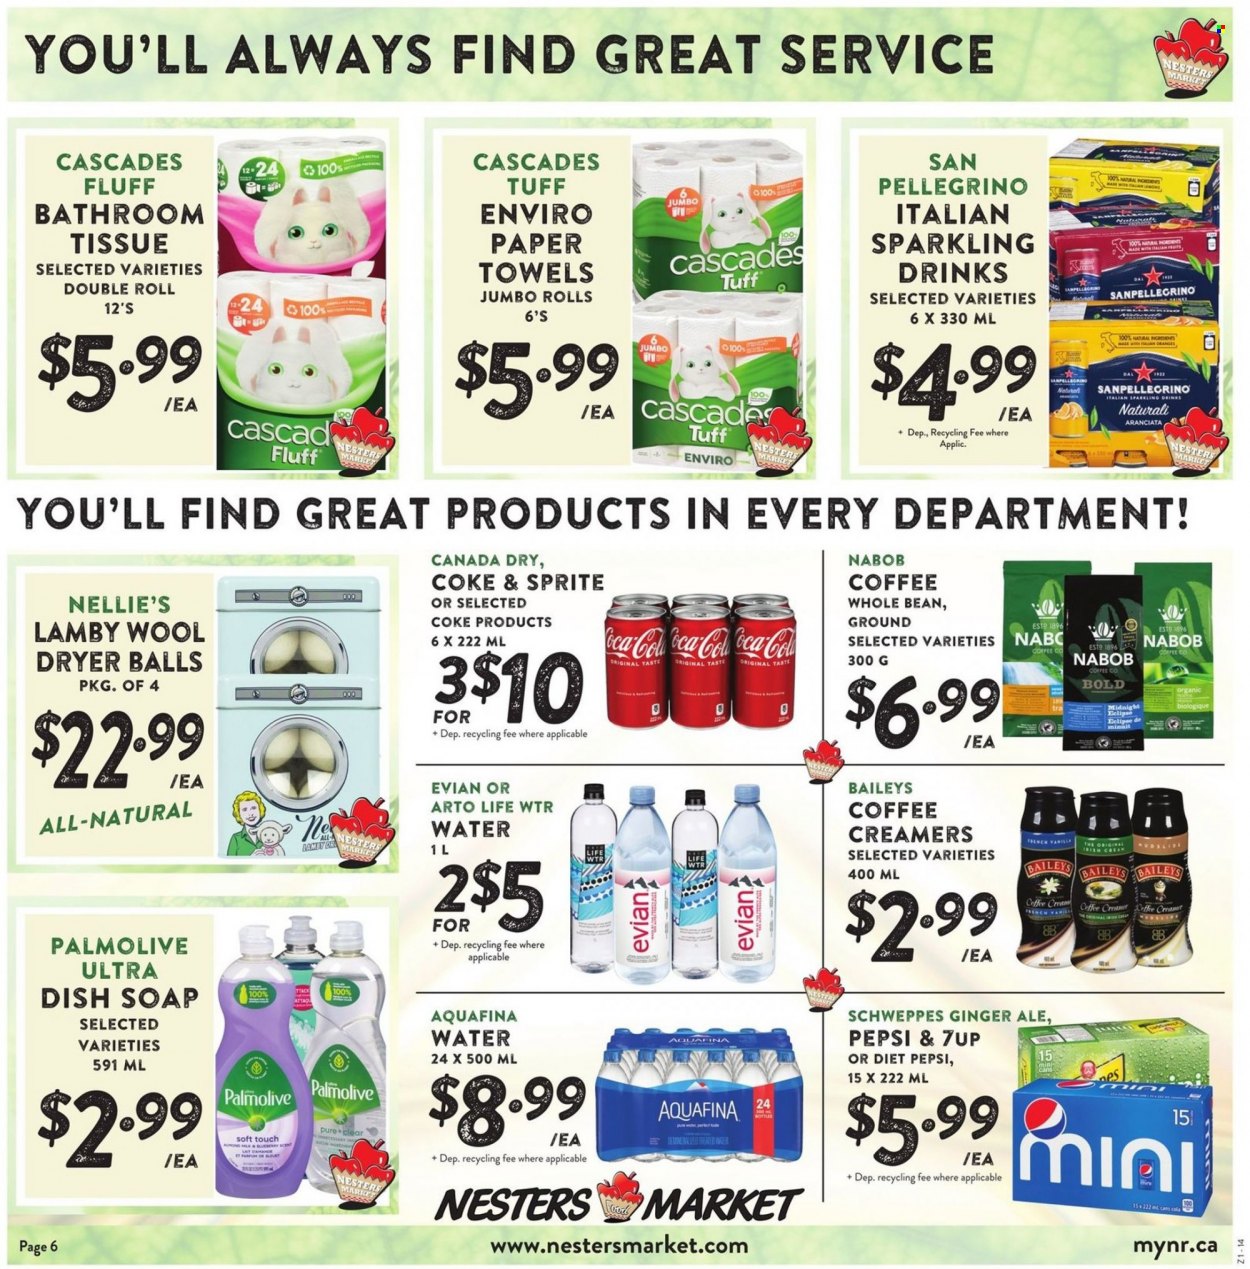 thumbnail - Nesters Food Market Flyer - May 22, 2022 - May 28, 2022 - Sales products - lemons, almond milk, creamer, Canada Dry, Coca-Cola, ginger ale, Schweppes, Sprite, Pepsi, Diet Pepsi, 7UP, Aquafina, Evian, San Pellegrino, Baileys, bath tissue, paper towels, Palmolive, soap, oranges. Page 6.